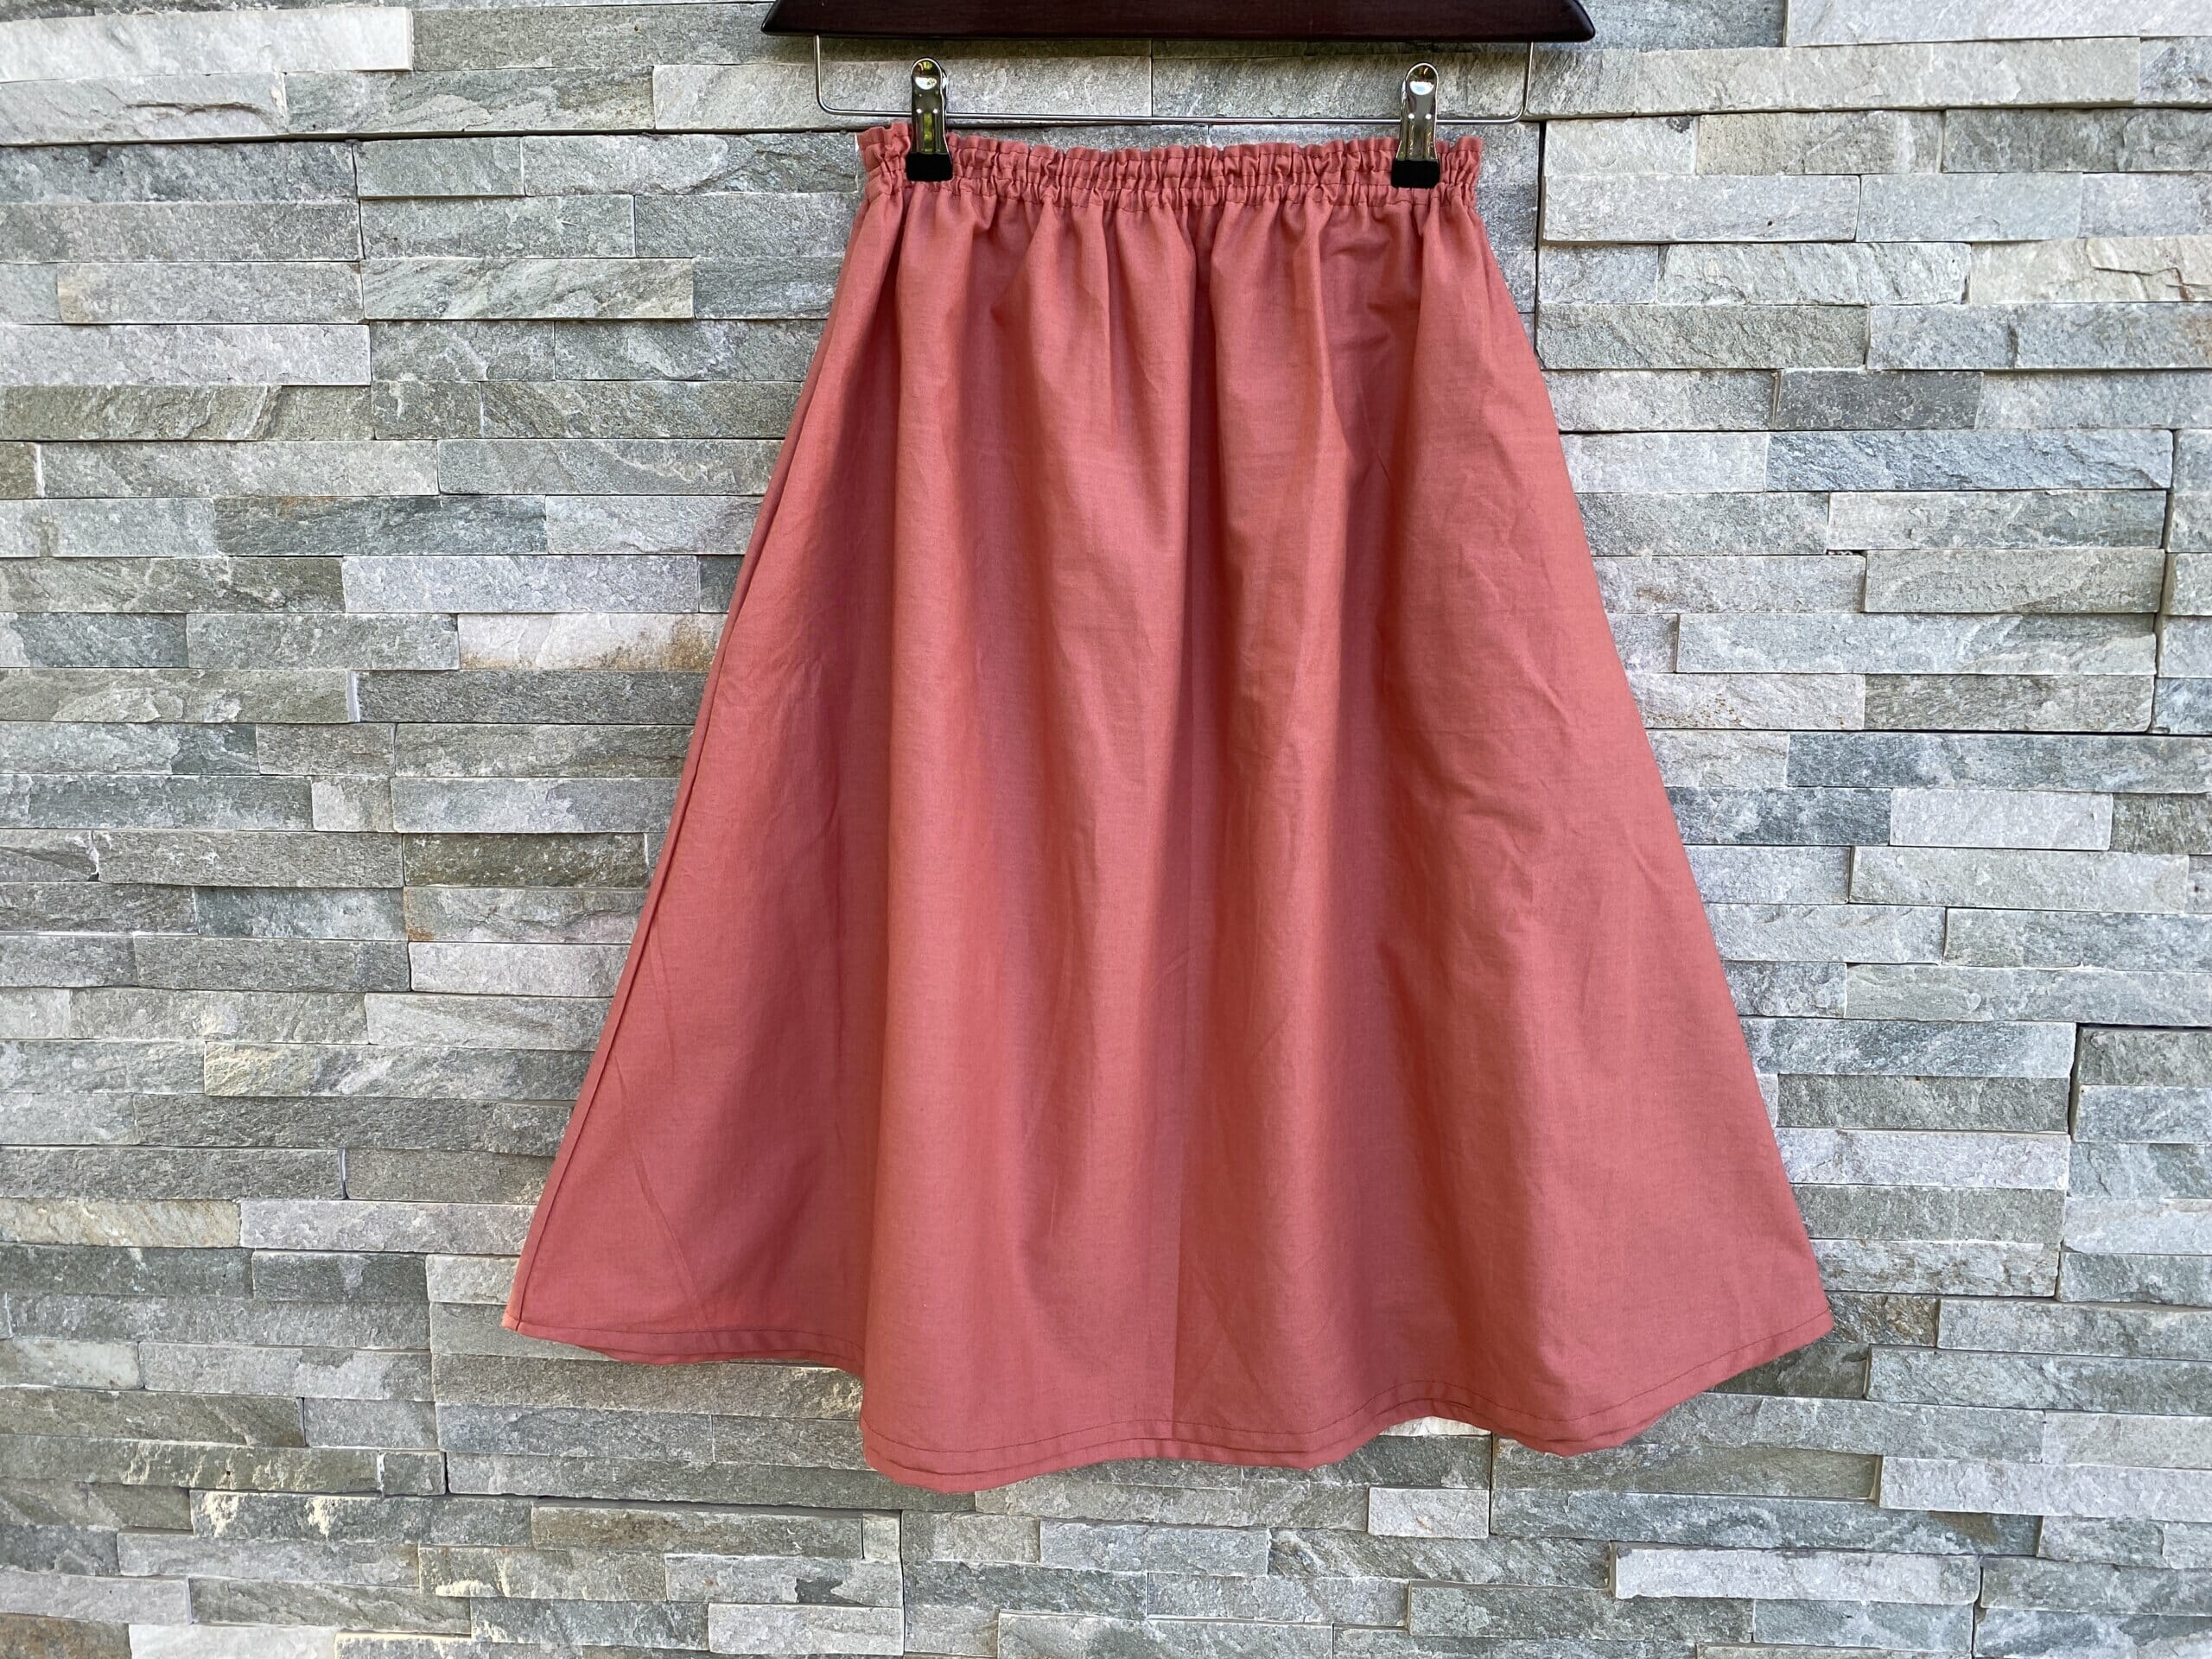 DIY tutorial: No pattern, simple summer skirt with pockets - I Can Sew This